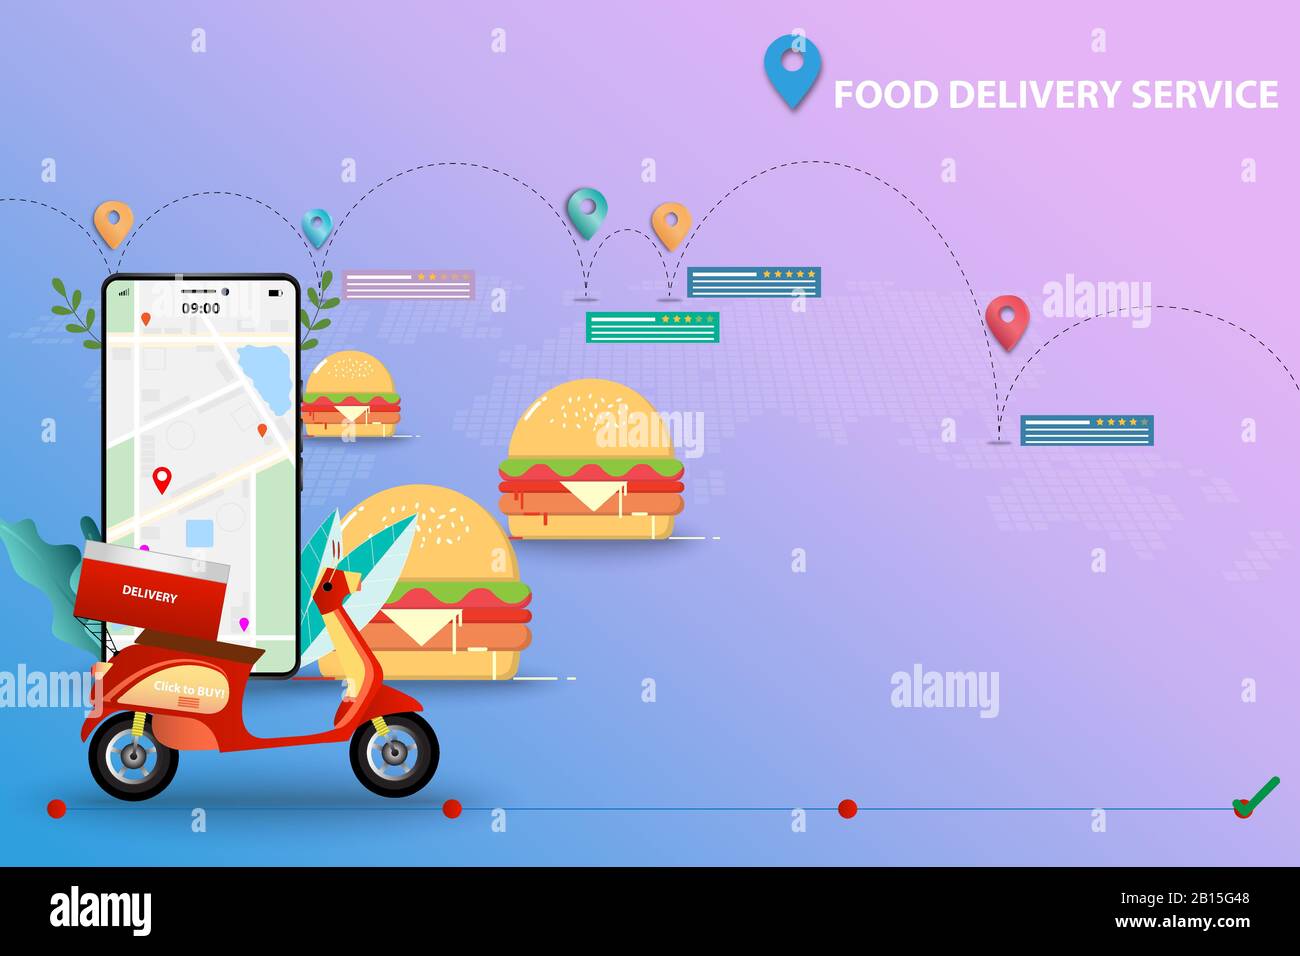 Concept of food delivery service, scooter is on front of smartphone which contain map and GPS. Hamburger are in the background together with map. Stock Vector